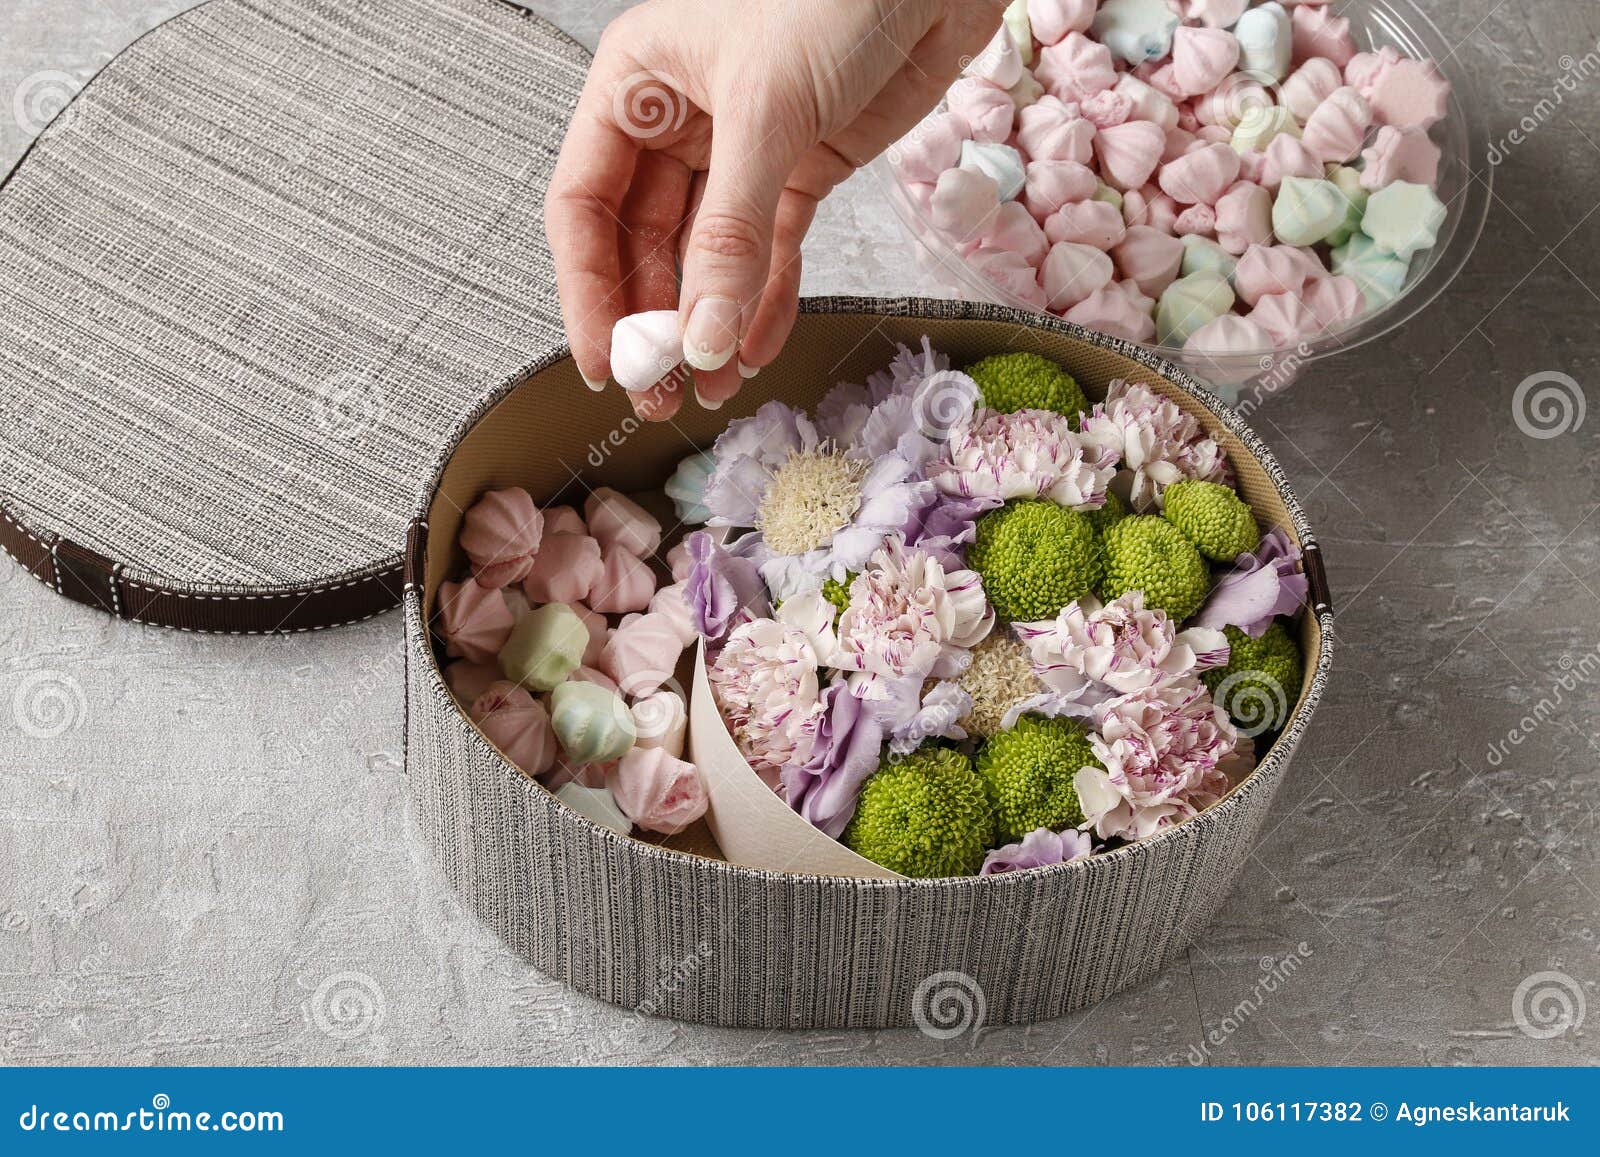 flowers and sweets in cartoon box - how to make adorable gift, s